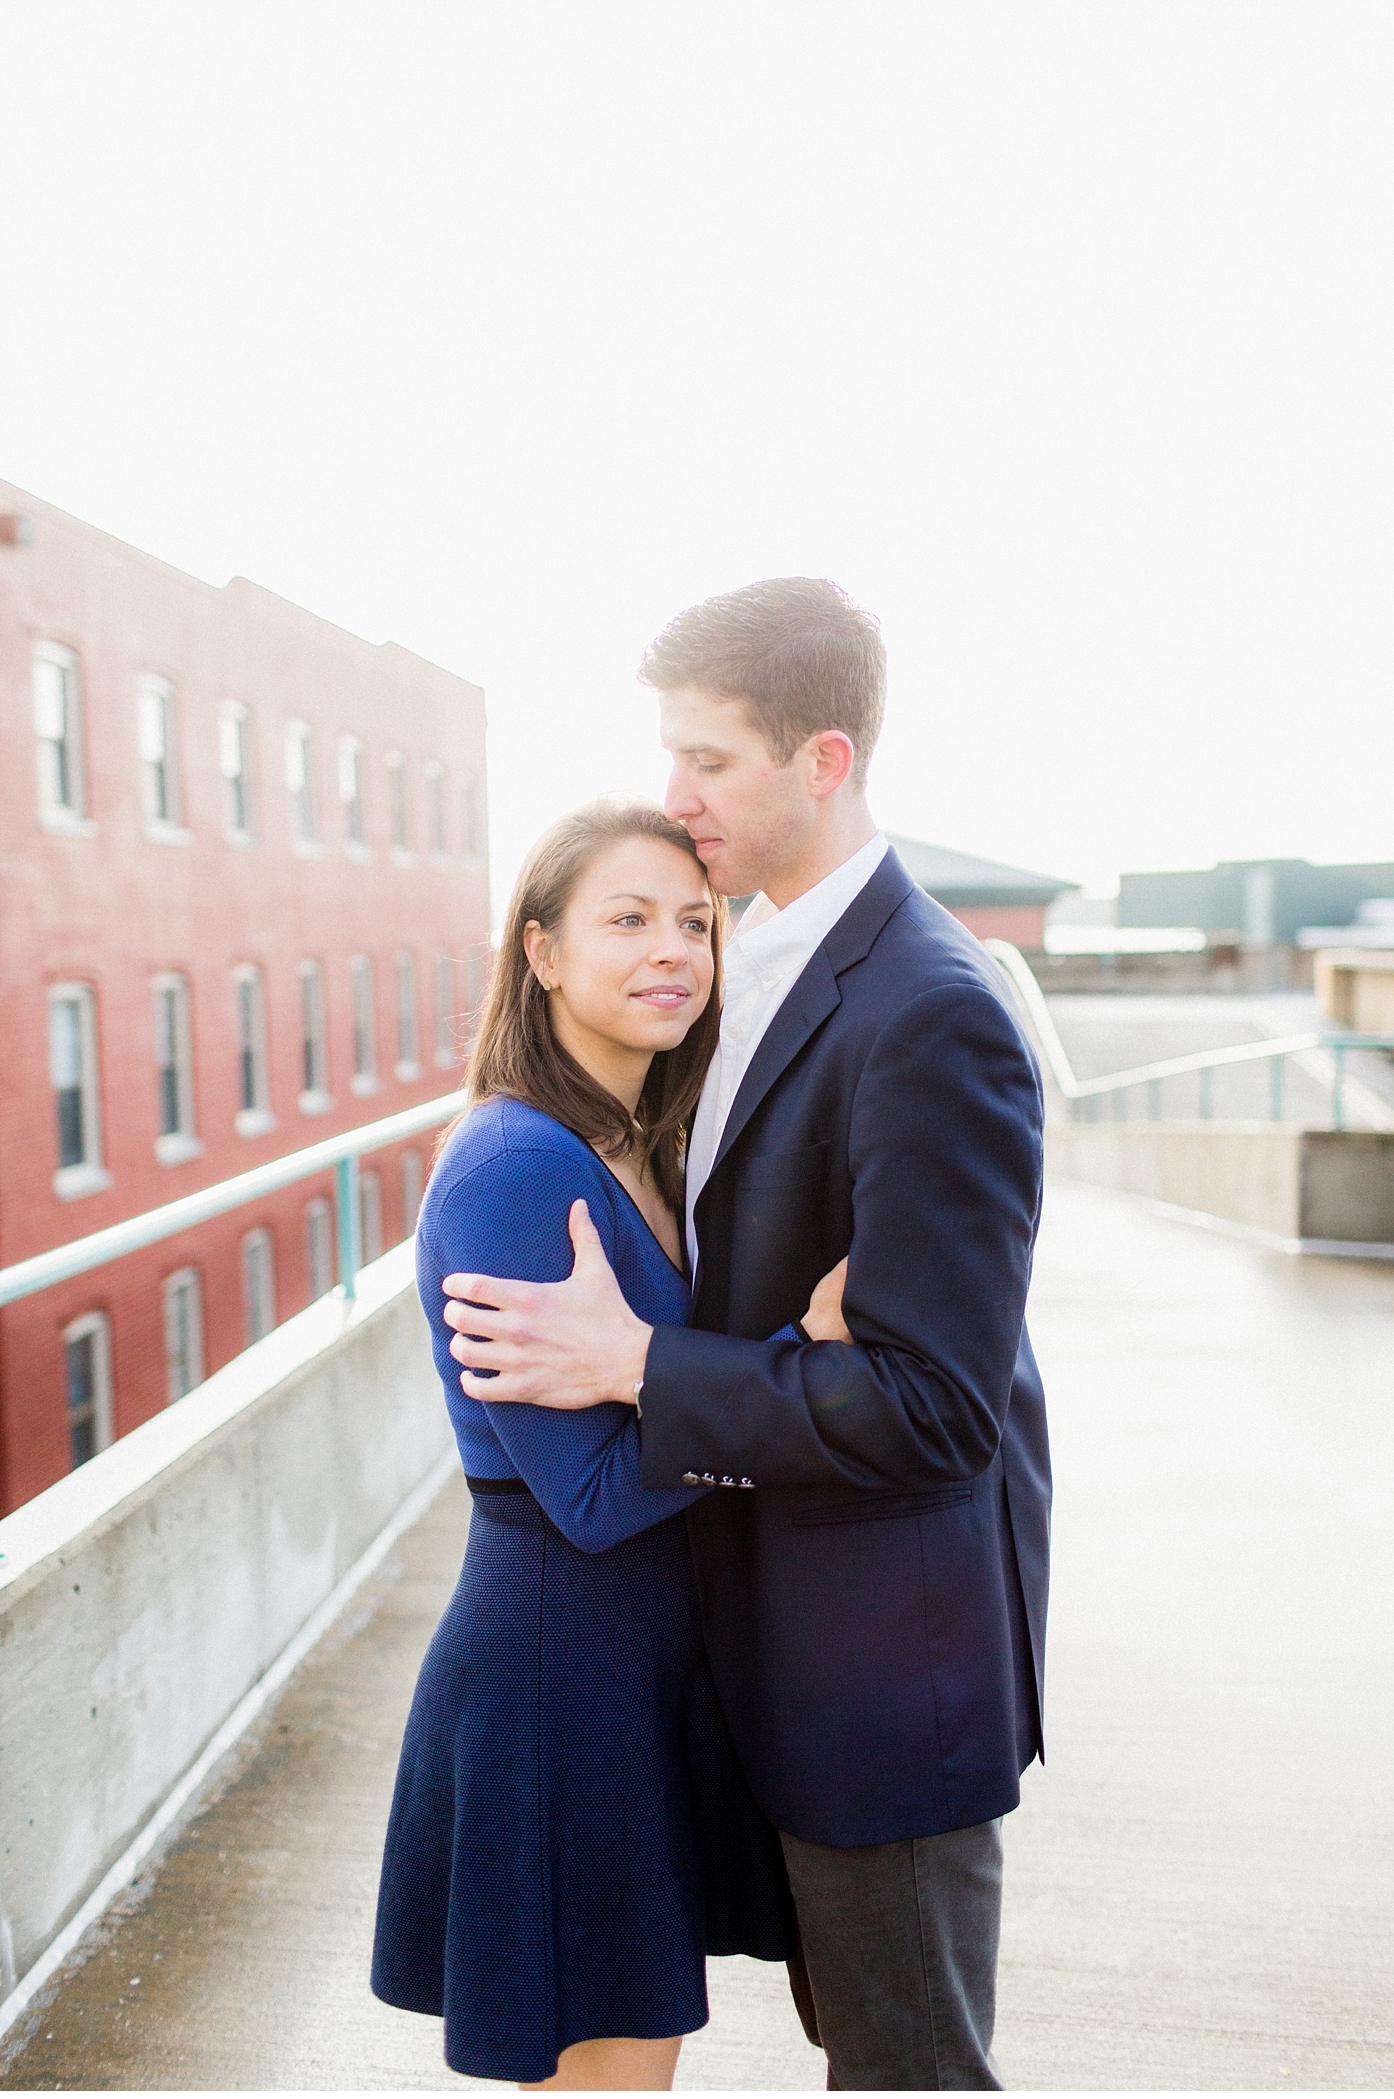 Romantic Sunrise Downtown Richmond Engagement Session by Alisandra Photography